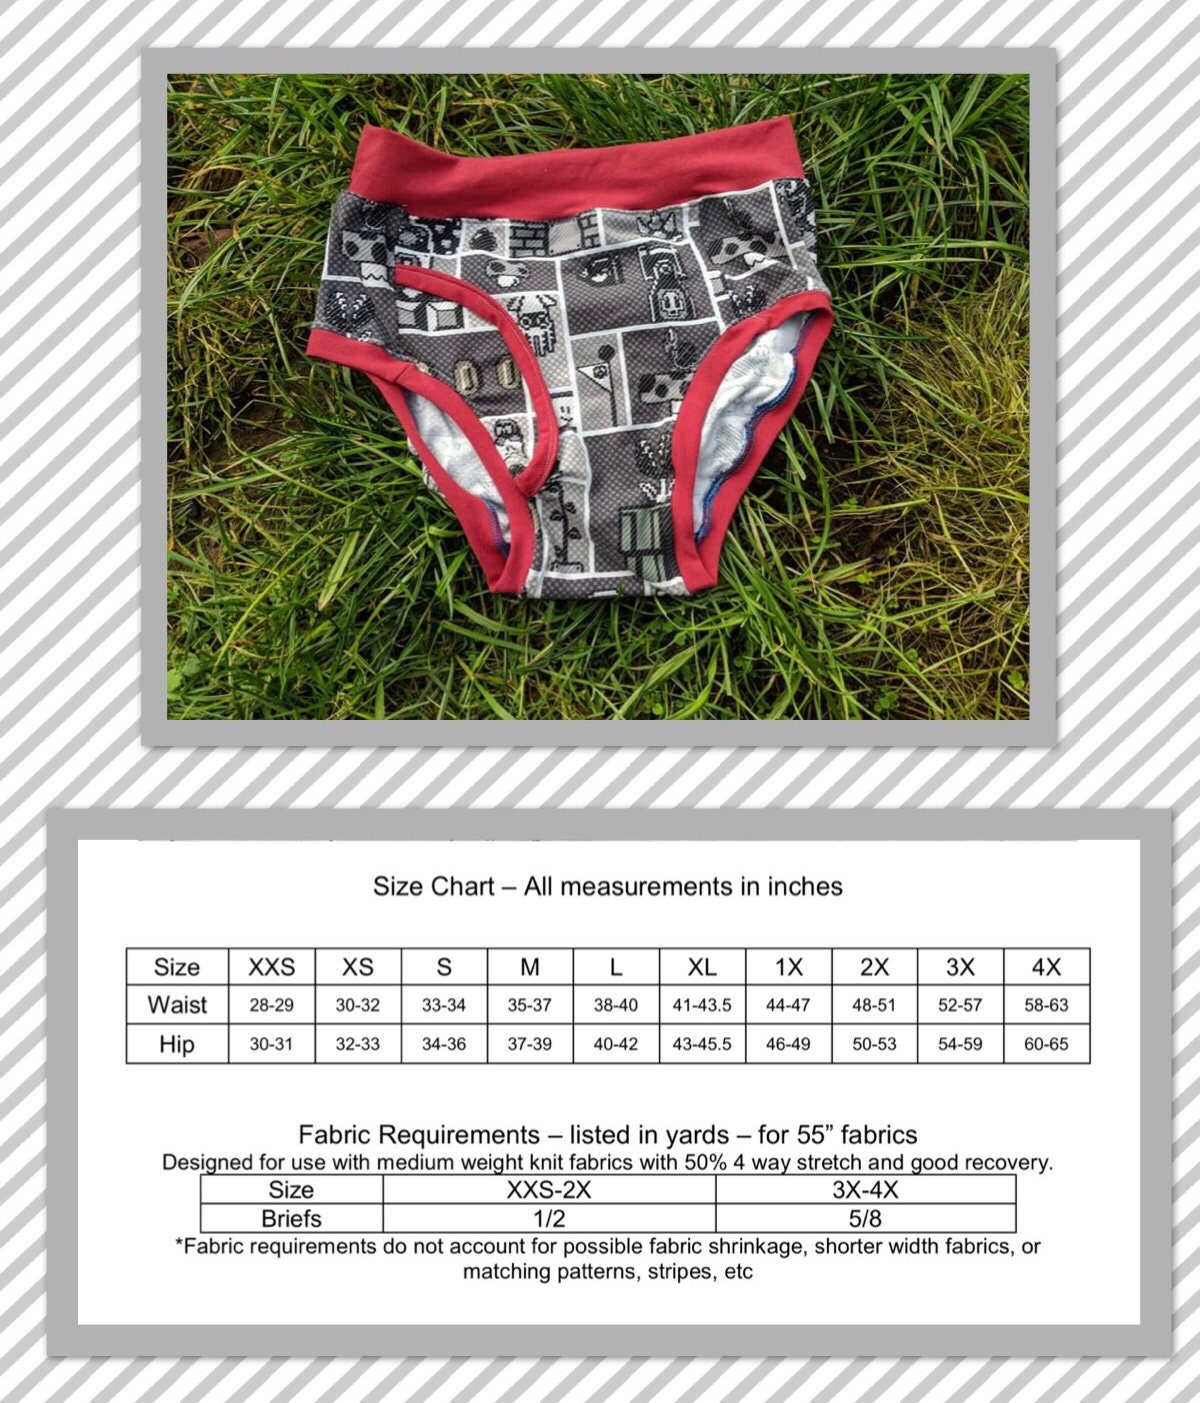 PATTERN Slip-on Briefs for Men, Sewing Pattern, Digital, Pattern PDF, Pack  Size S 2XL, Instant Download -  Canada